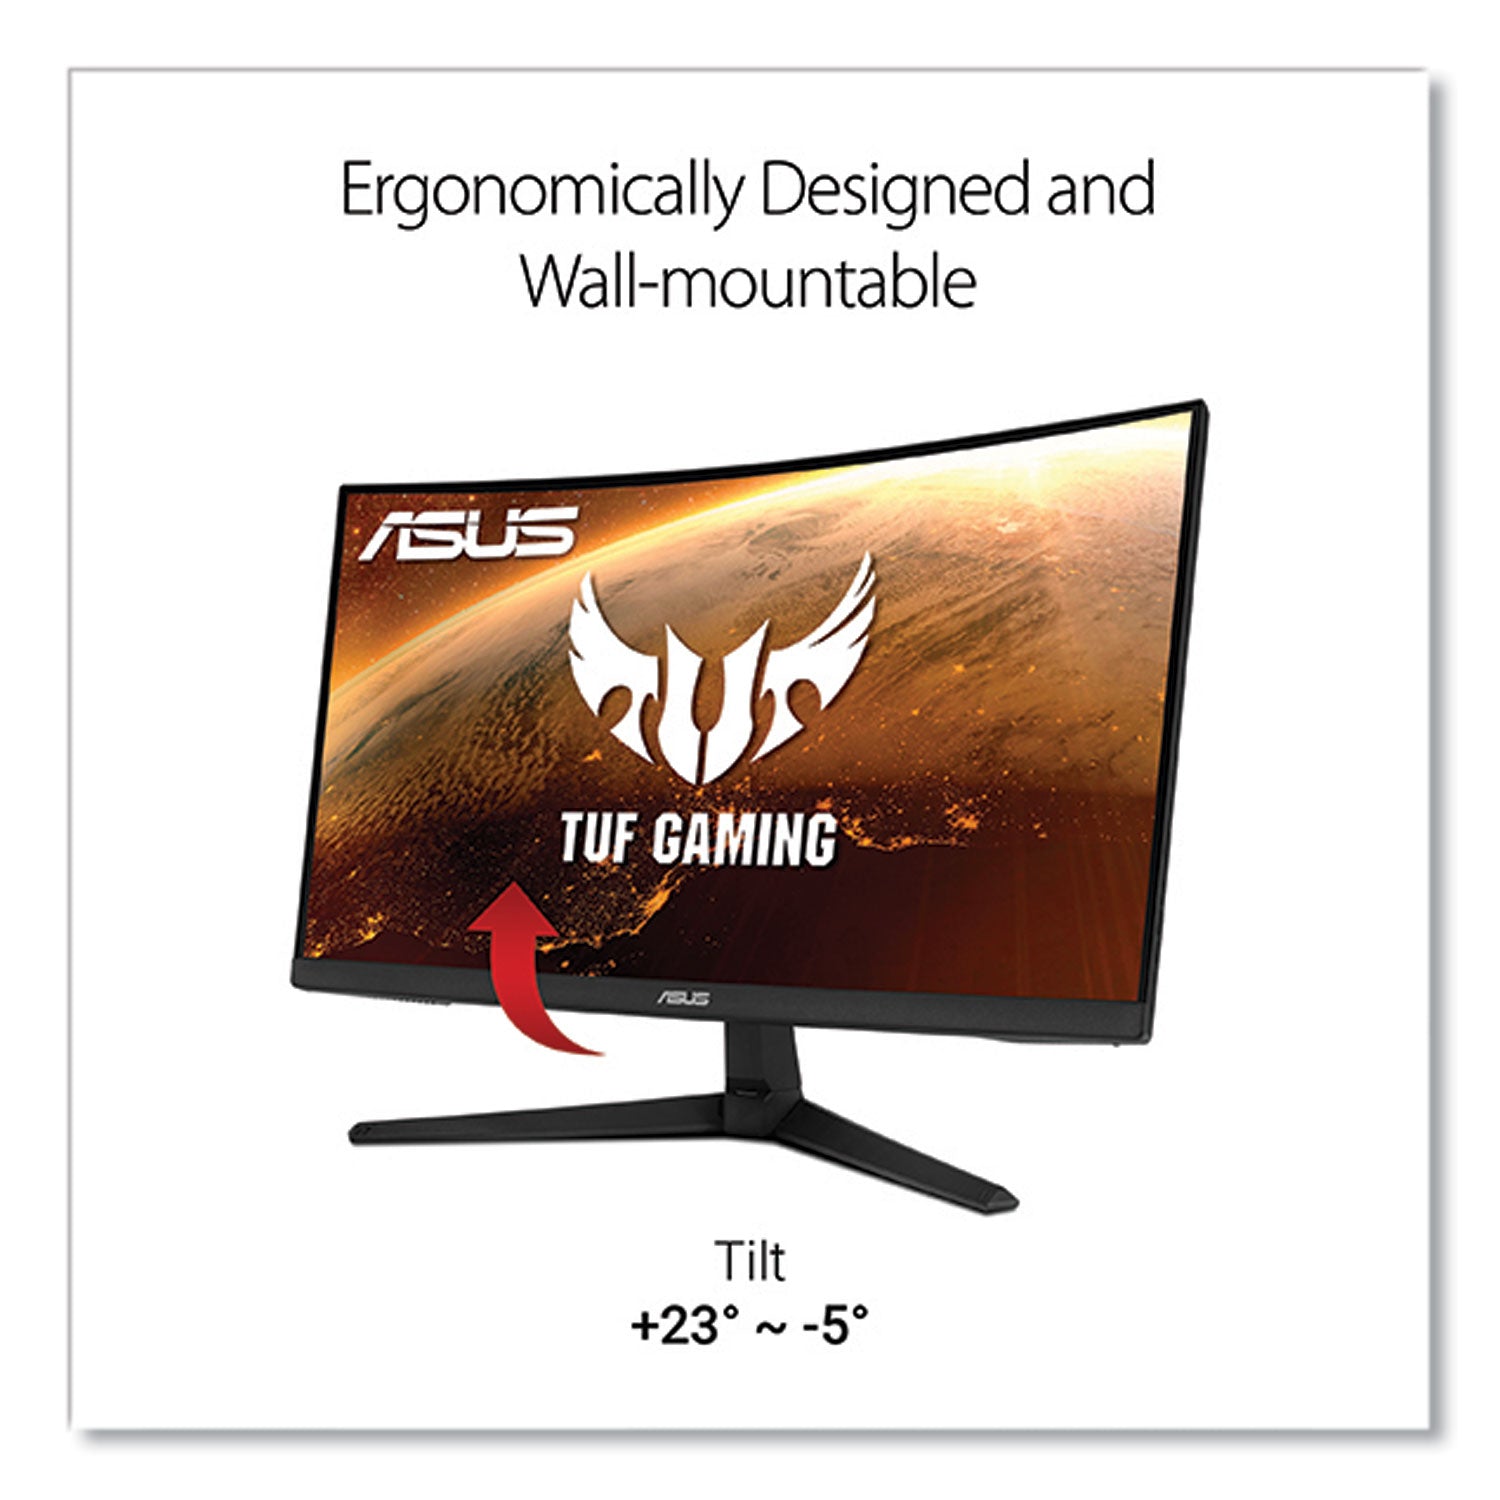 vg24vq1by-tuf-gaming-led-monitor-238-widescreen-va-panel-1920-pixels-x-1080-pixels_asuvg24vq1by - 7